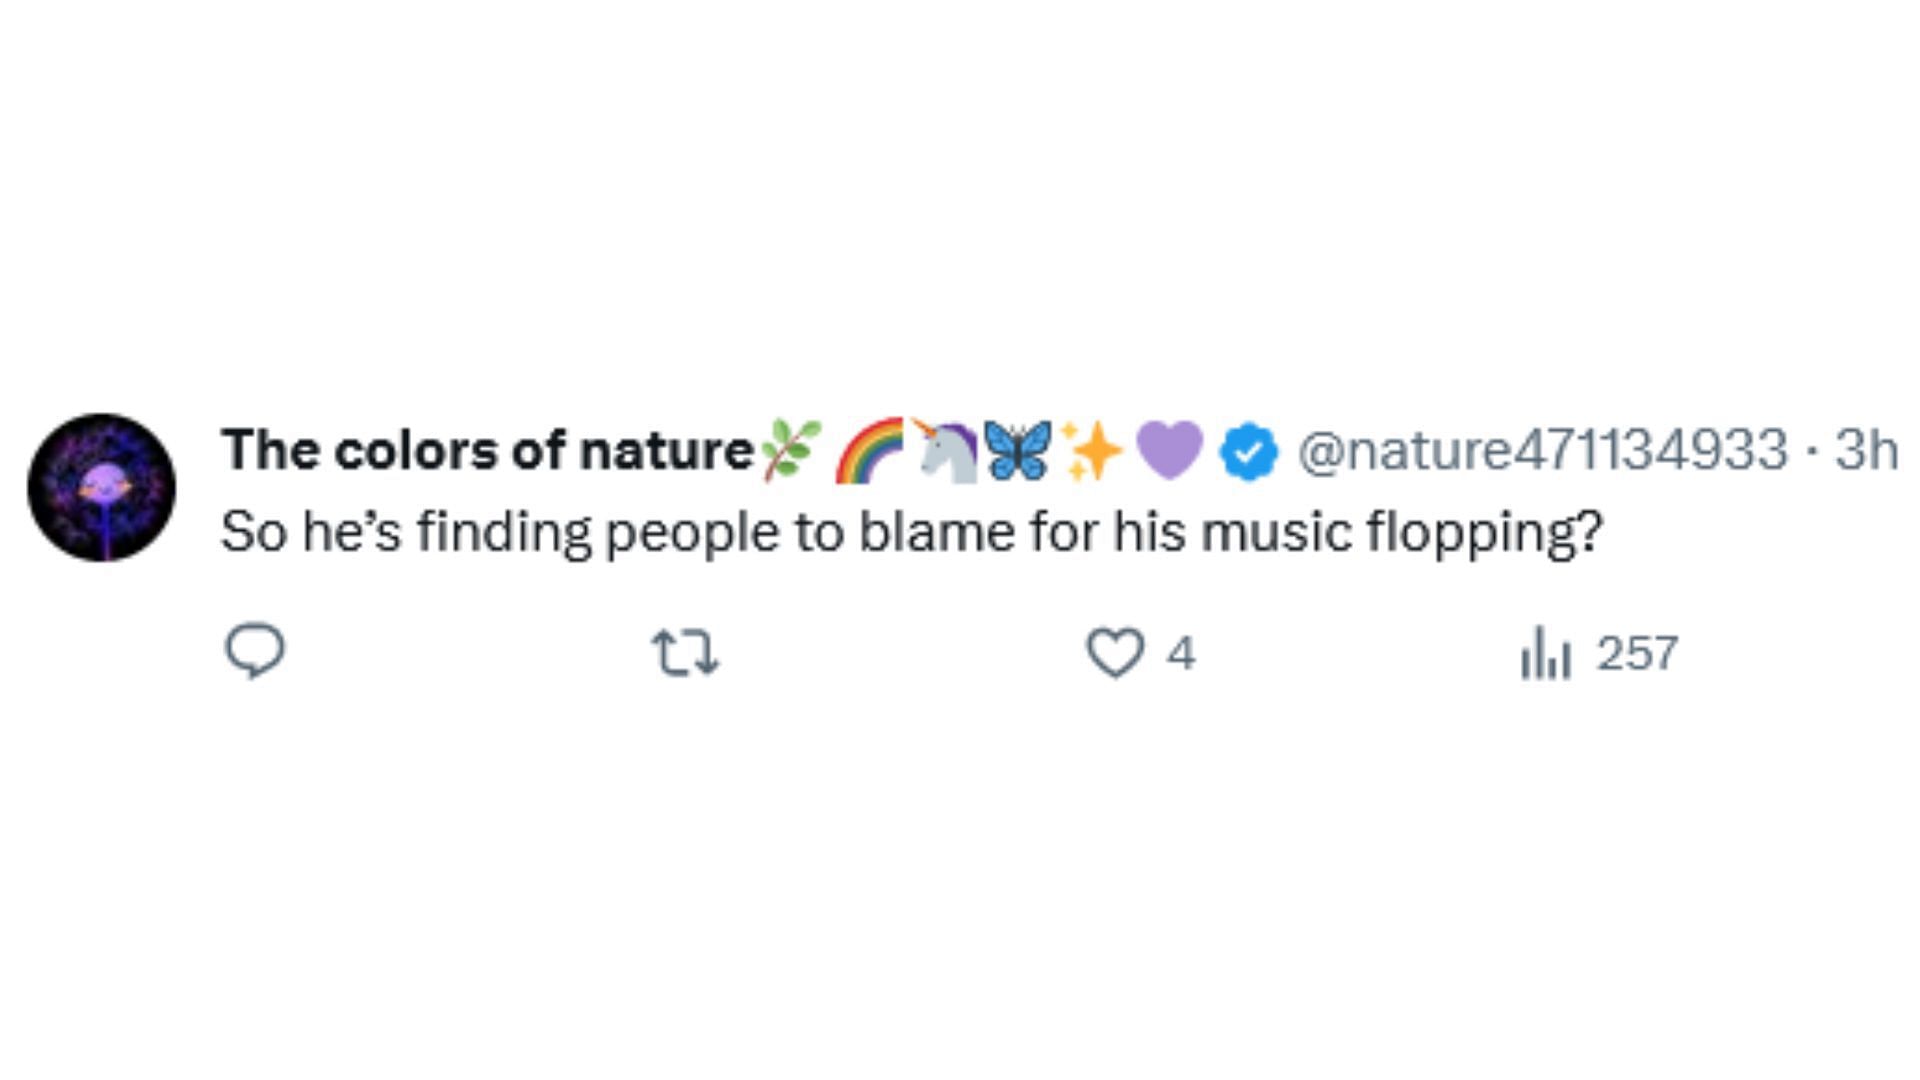 Netizens mock Timberlake for his recent comment regarding the Britney drama (Image via X / @nature471134933)